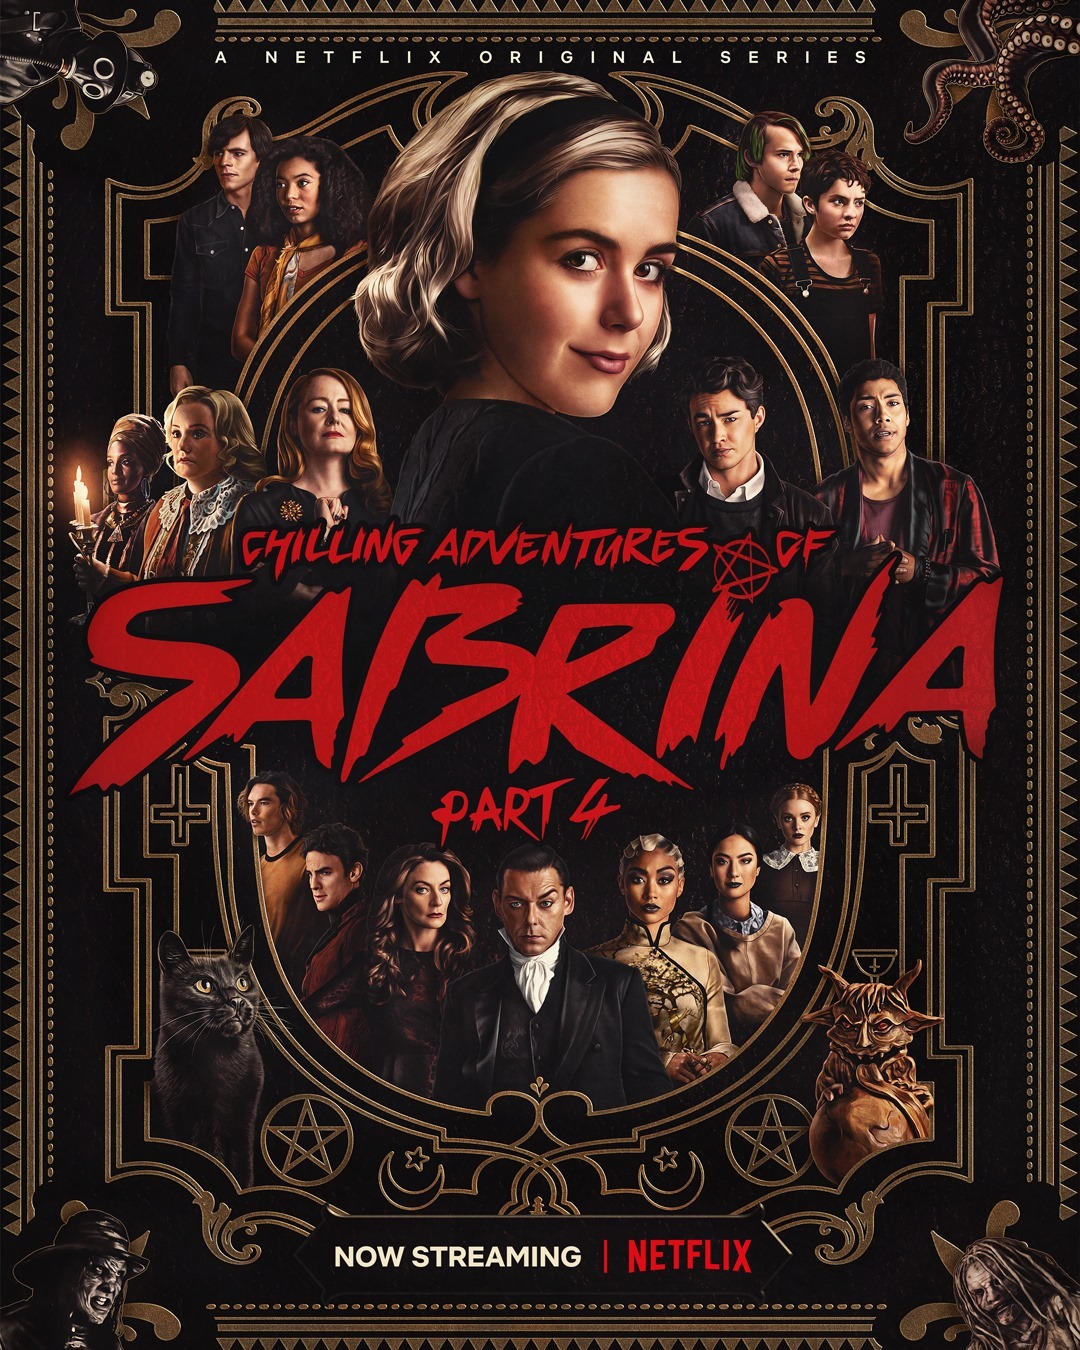 Extra Large TV Poster Image for Chilling Adventures of Sabrina (#8 of 8)